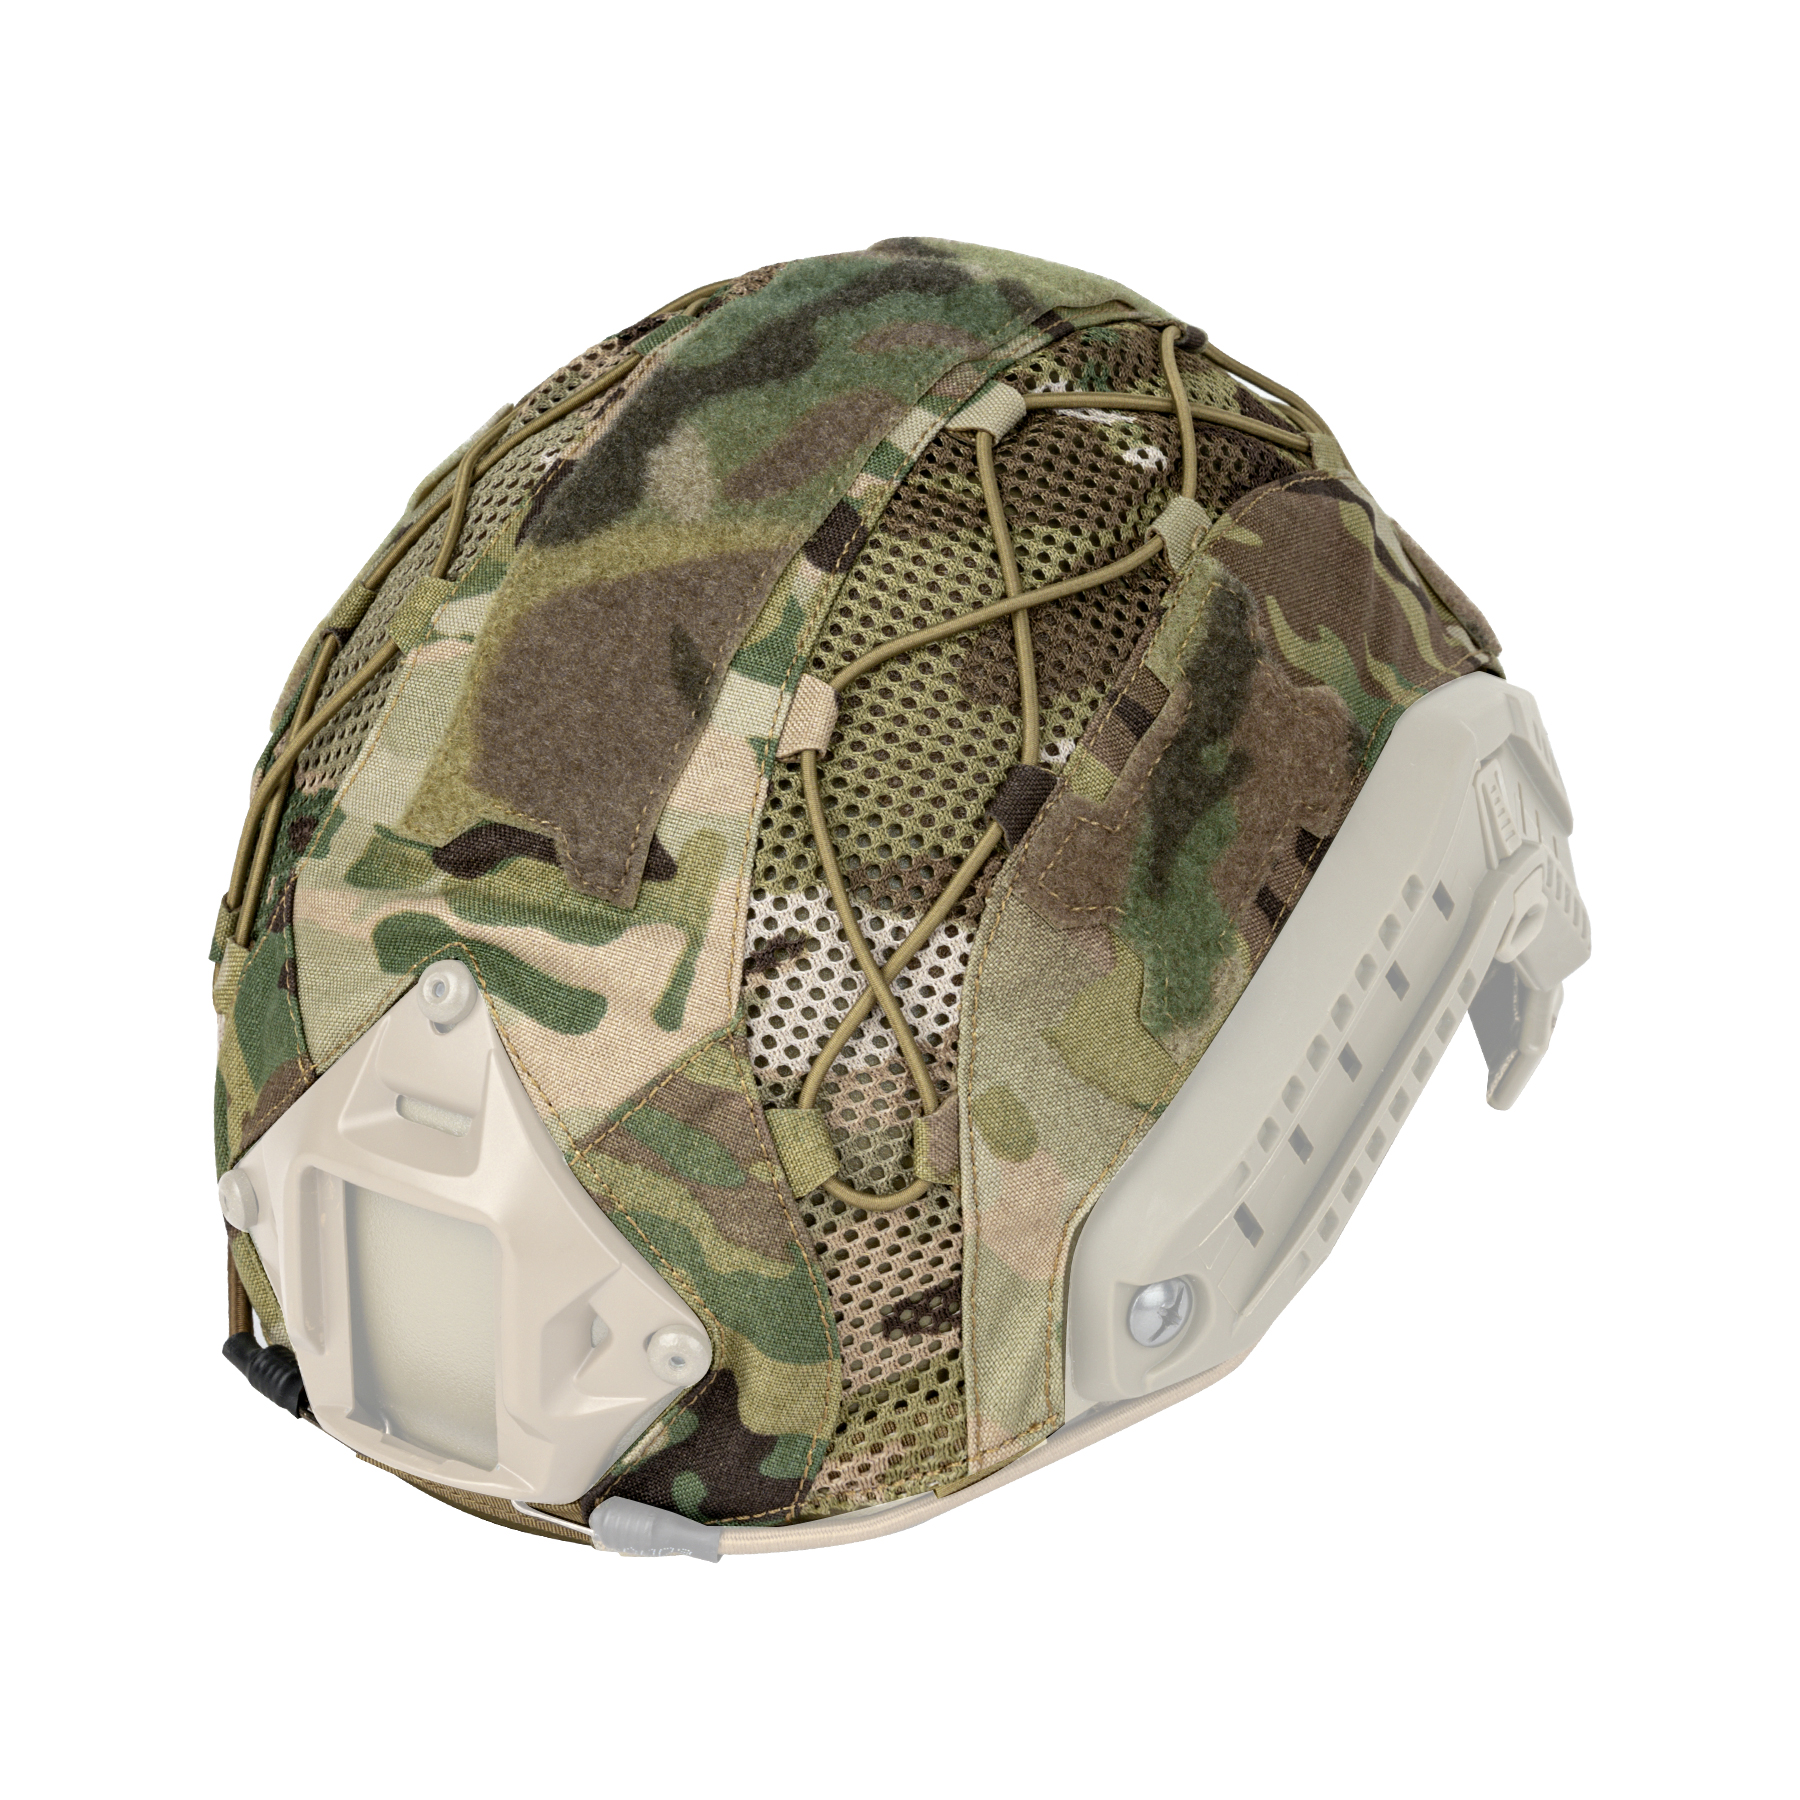 TOPTACPRO Tactical Helmet Camouflage Cover For Fast Helmet In Size S/M, Paintball Shooting Gear - Cordura 500D Nylon -Without Helmet 8801-IDOGEAR INDUSTRIAL